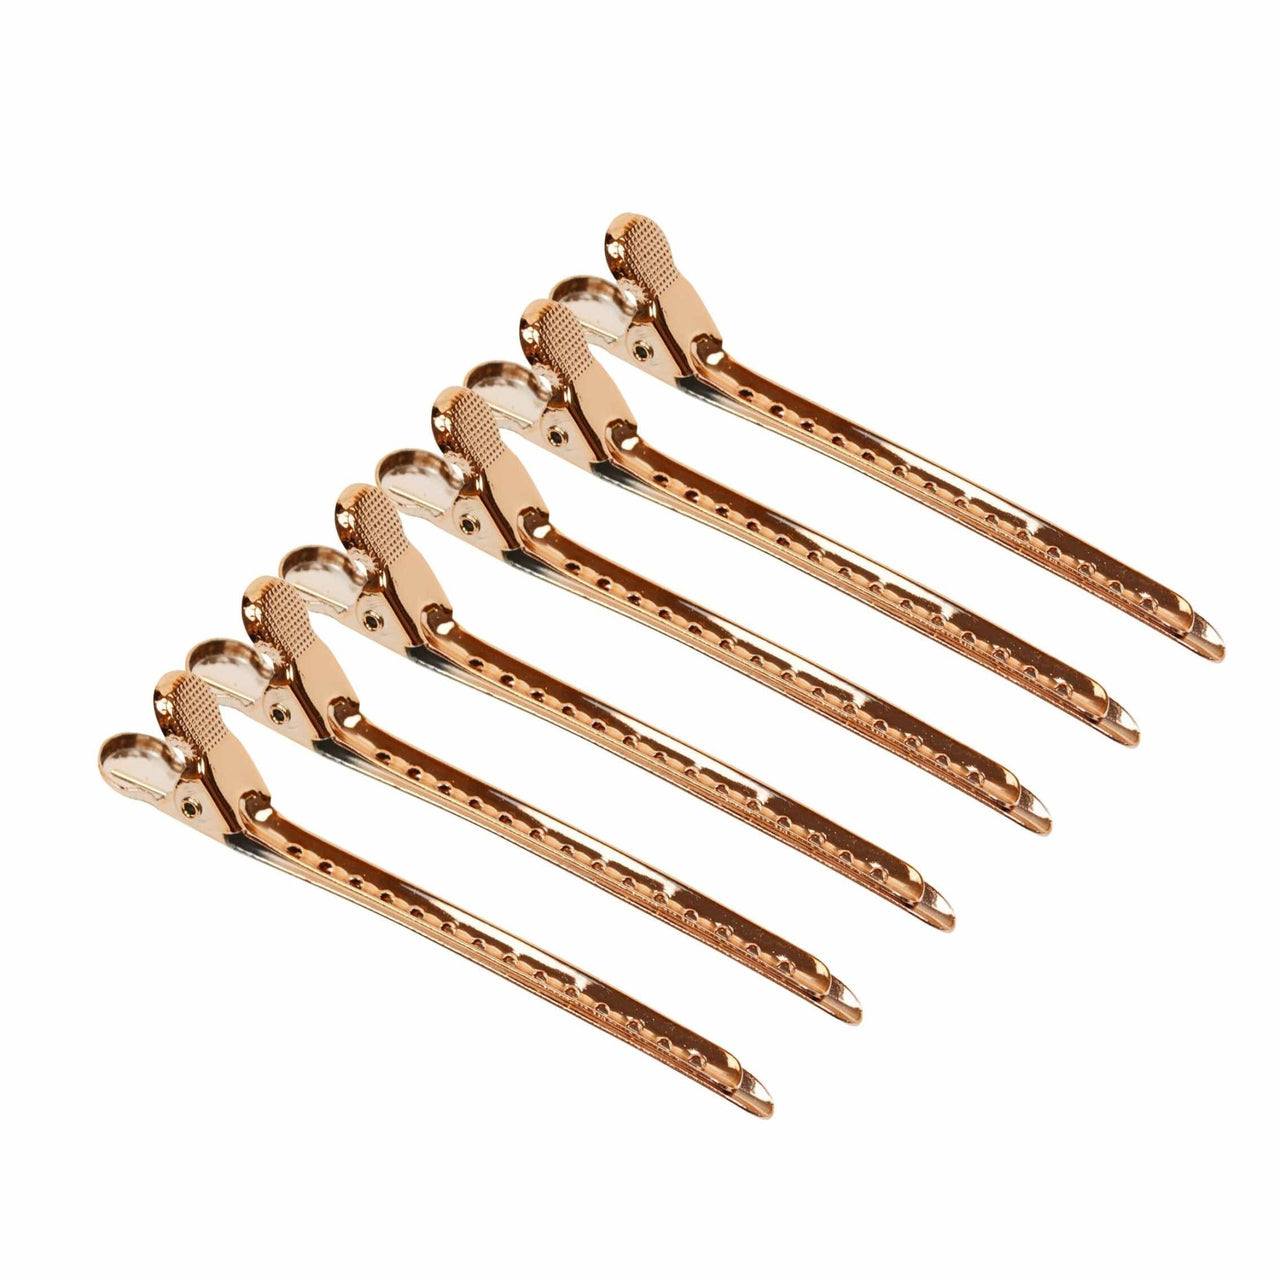 MOON COLLECTION_Duckbill hair clips steel 9.5cm/3.75" - 12 pieces (Gold)_Cosmetic World